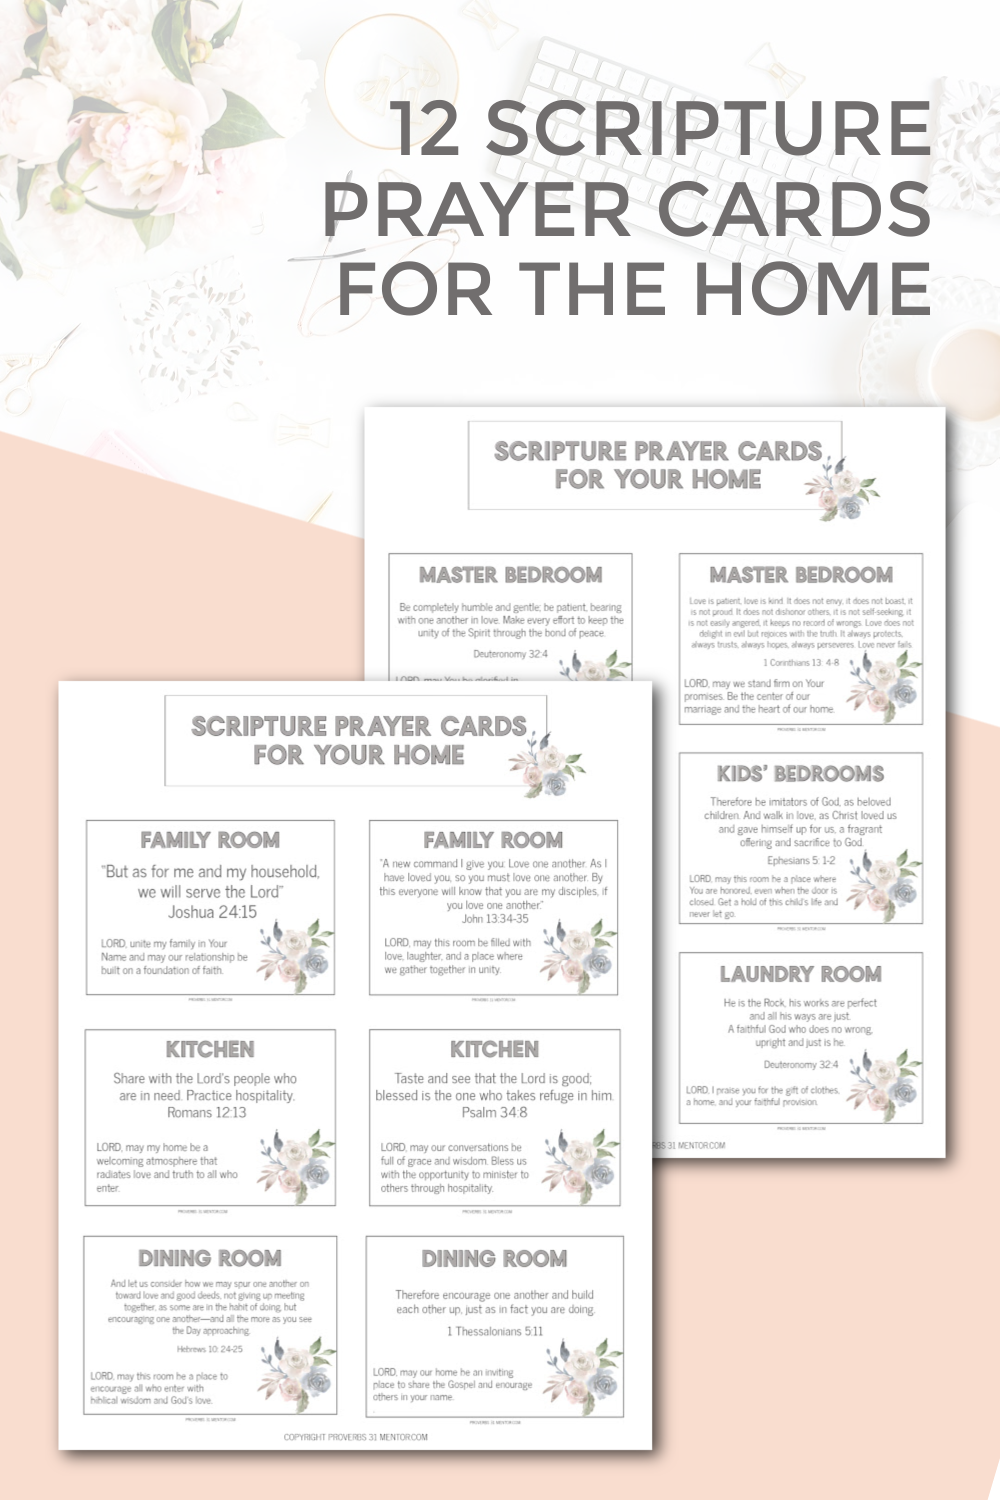 Scripture Prayer Cards for the Home